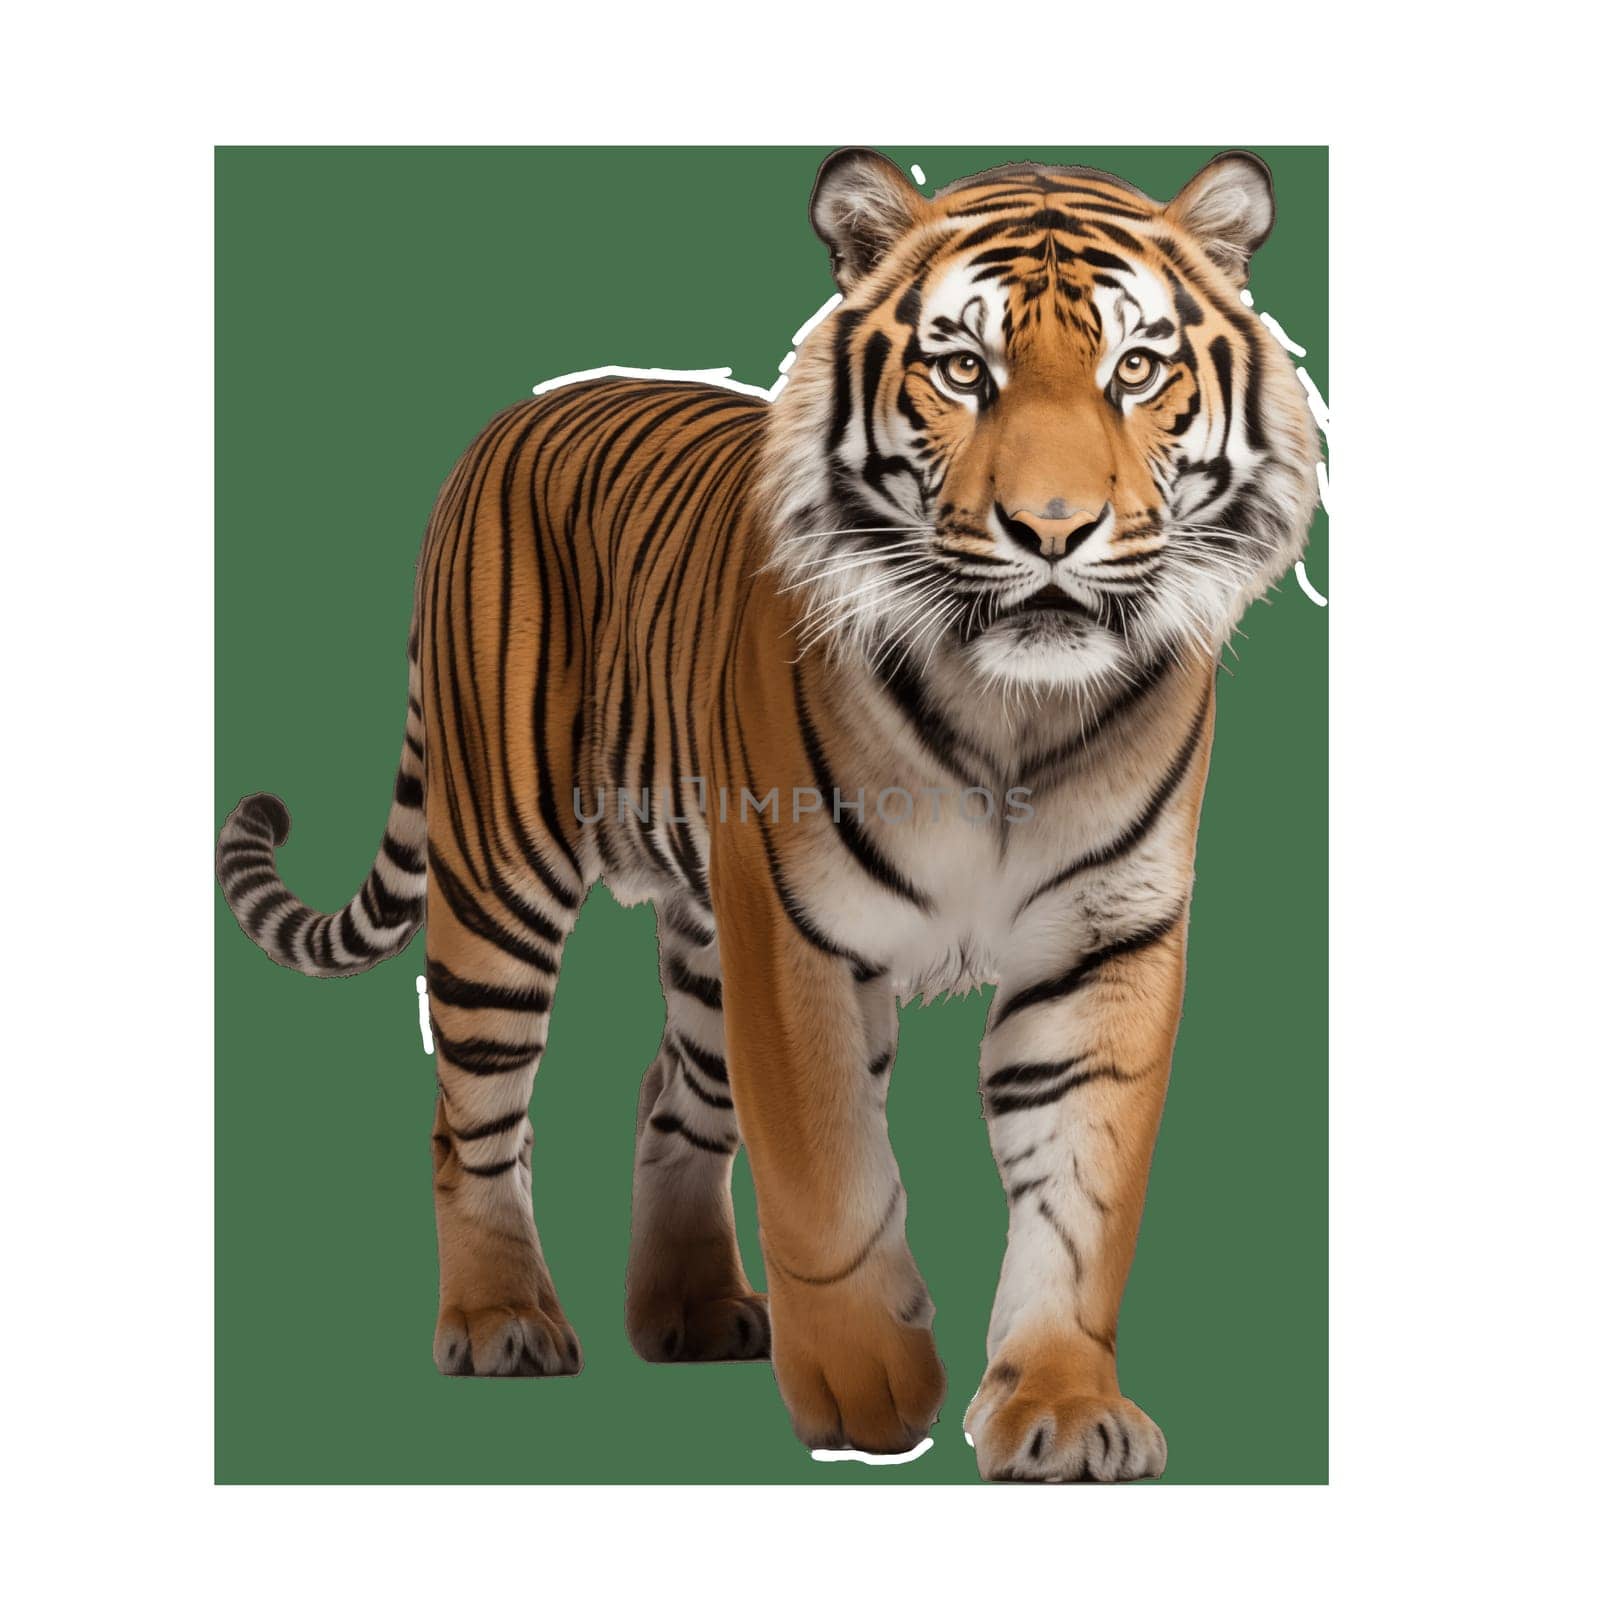 Amur wild tiger isolated image by Dustick